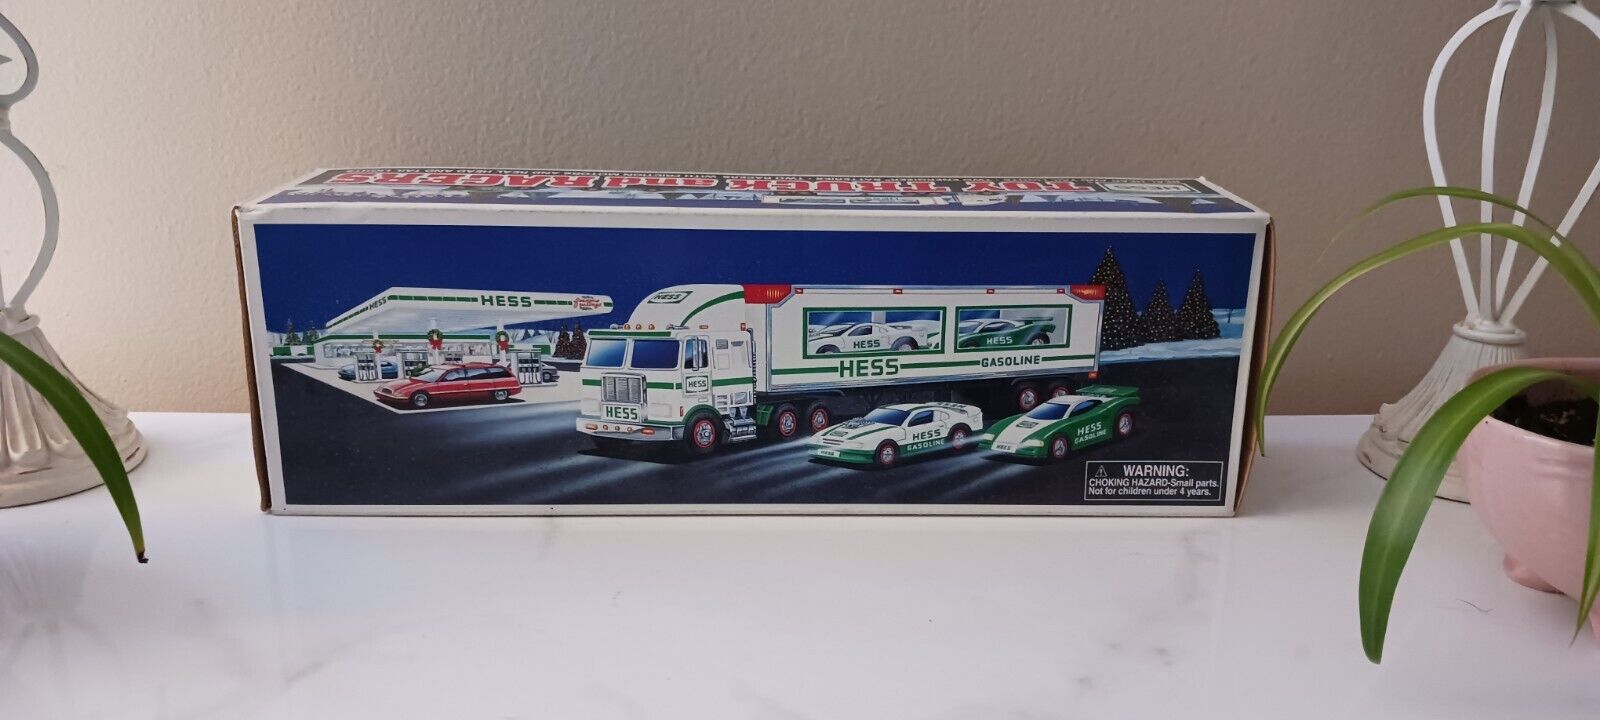 Vintage 1997 Hess Toy Truck and Racers In Original Box New Nostalgia 